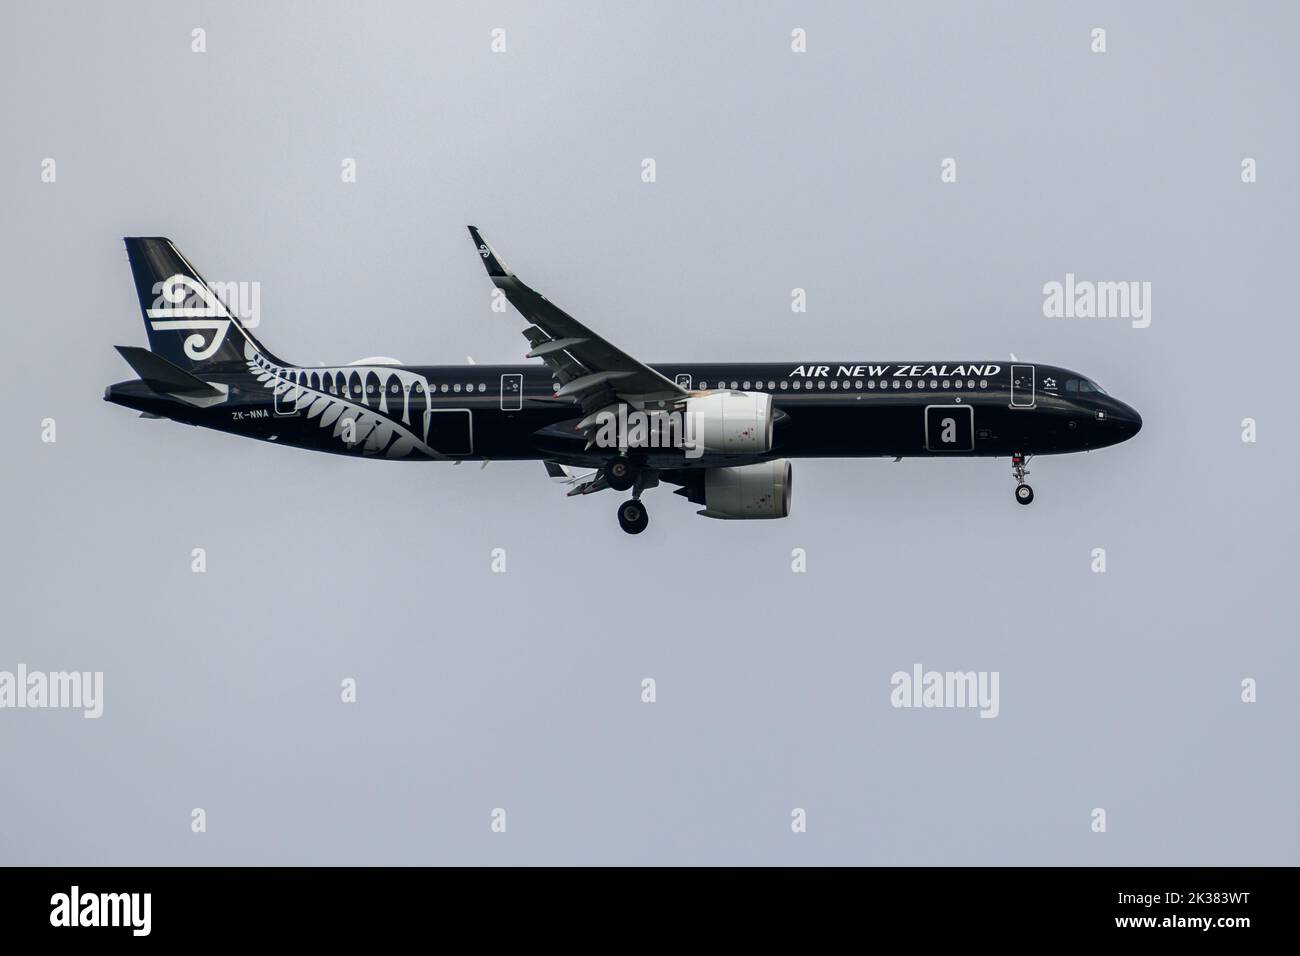 Air New Zealand Airlines Airbus A320 Arriving at Sydney Airport Stock Photo